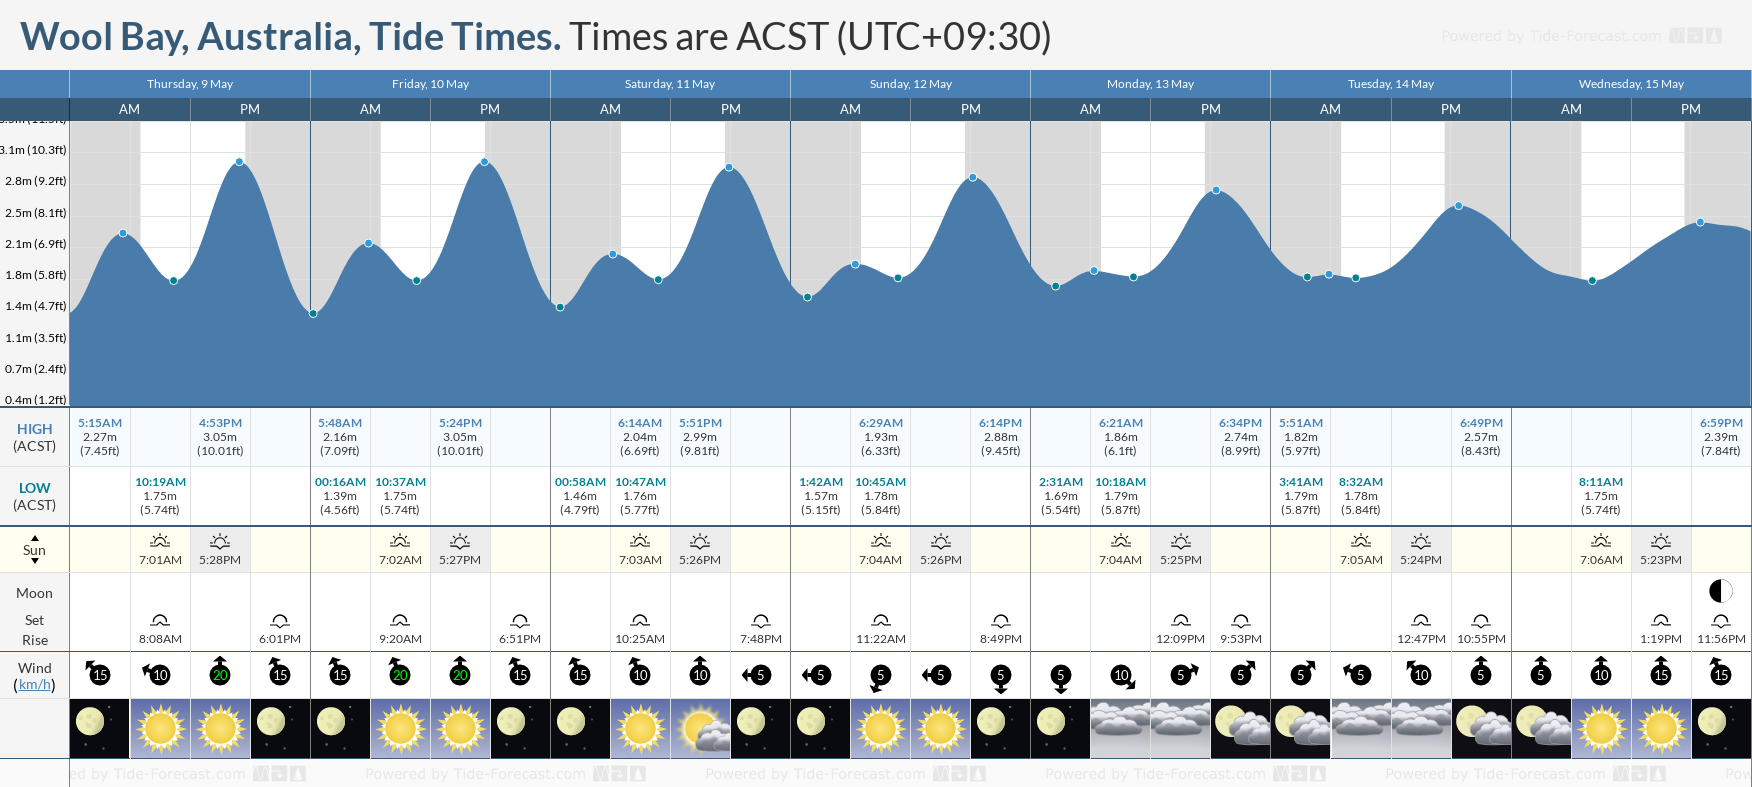 Wool Bay, Australia Tide Chart including high and low tide tide times for the next 7 days